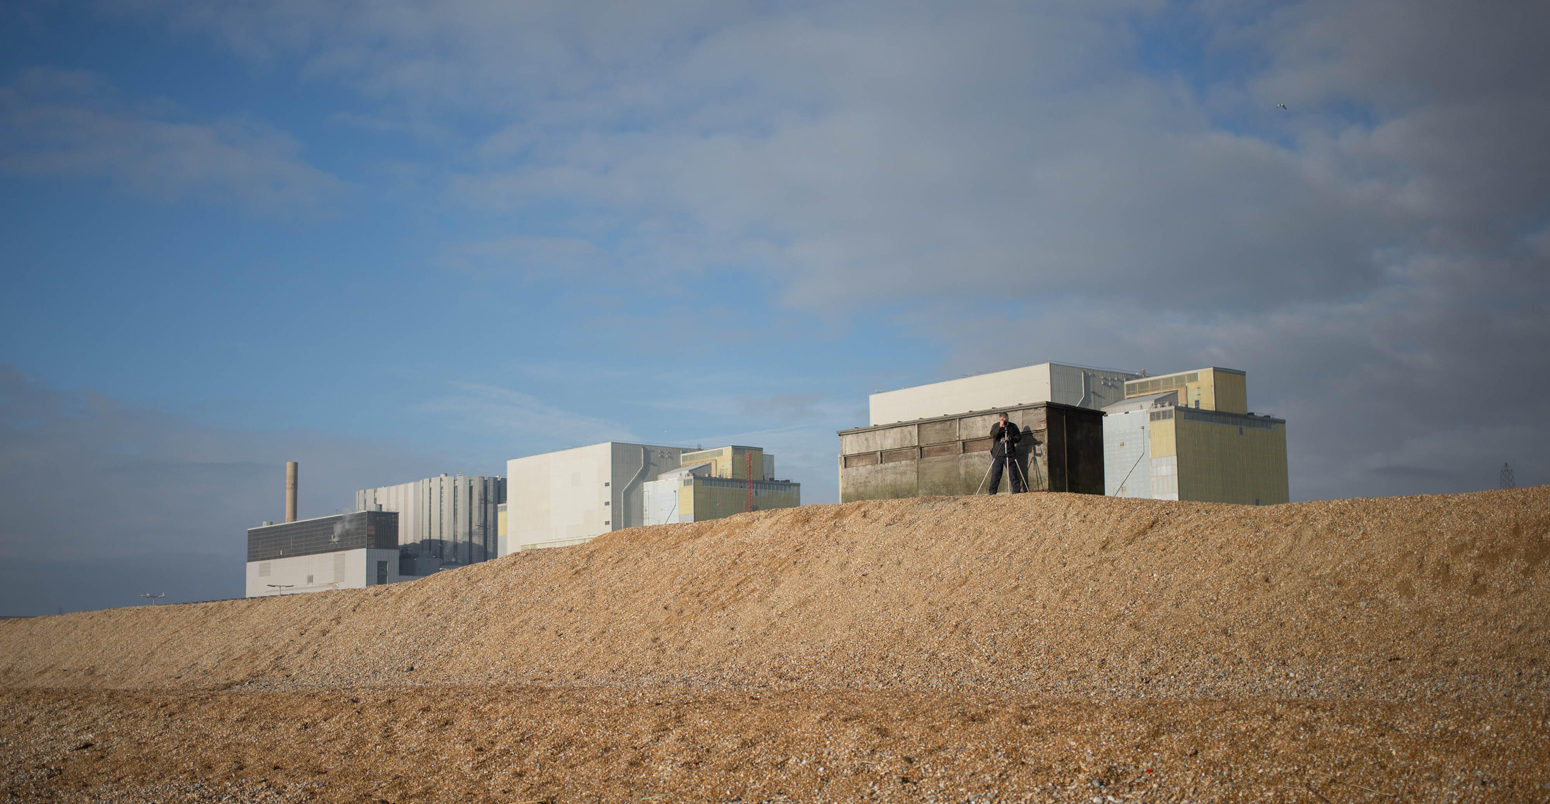 Dungeness nuclear power station, Kent, UK